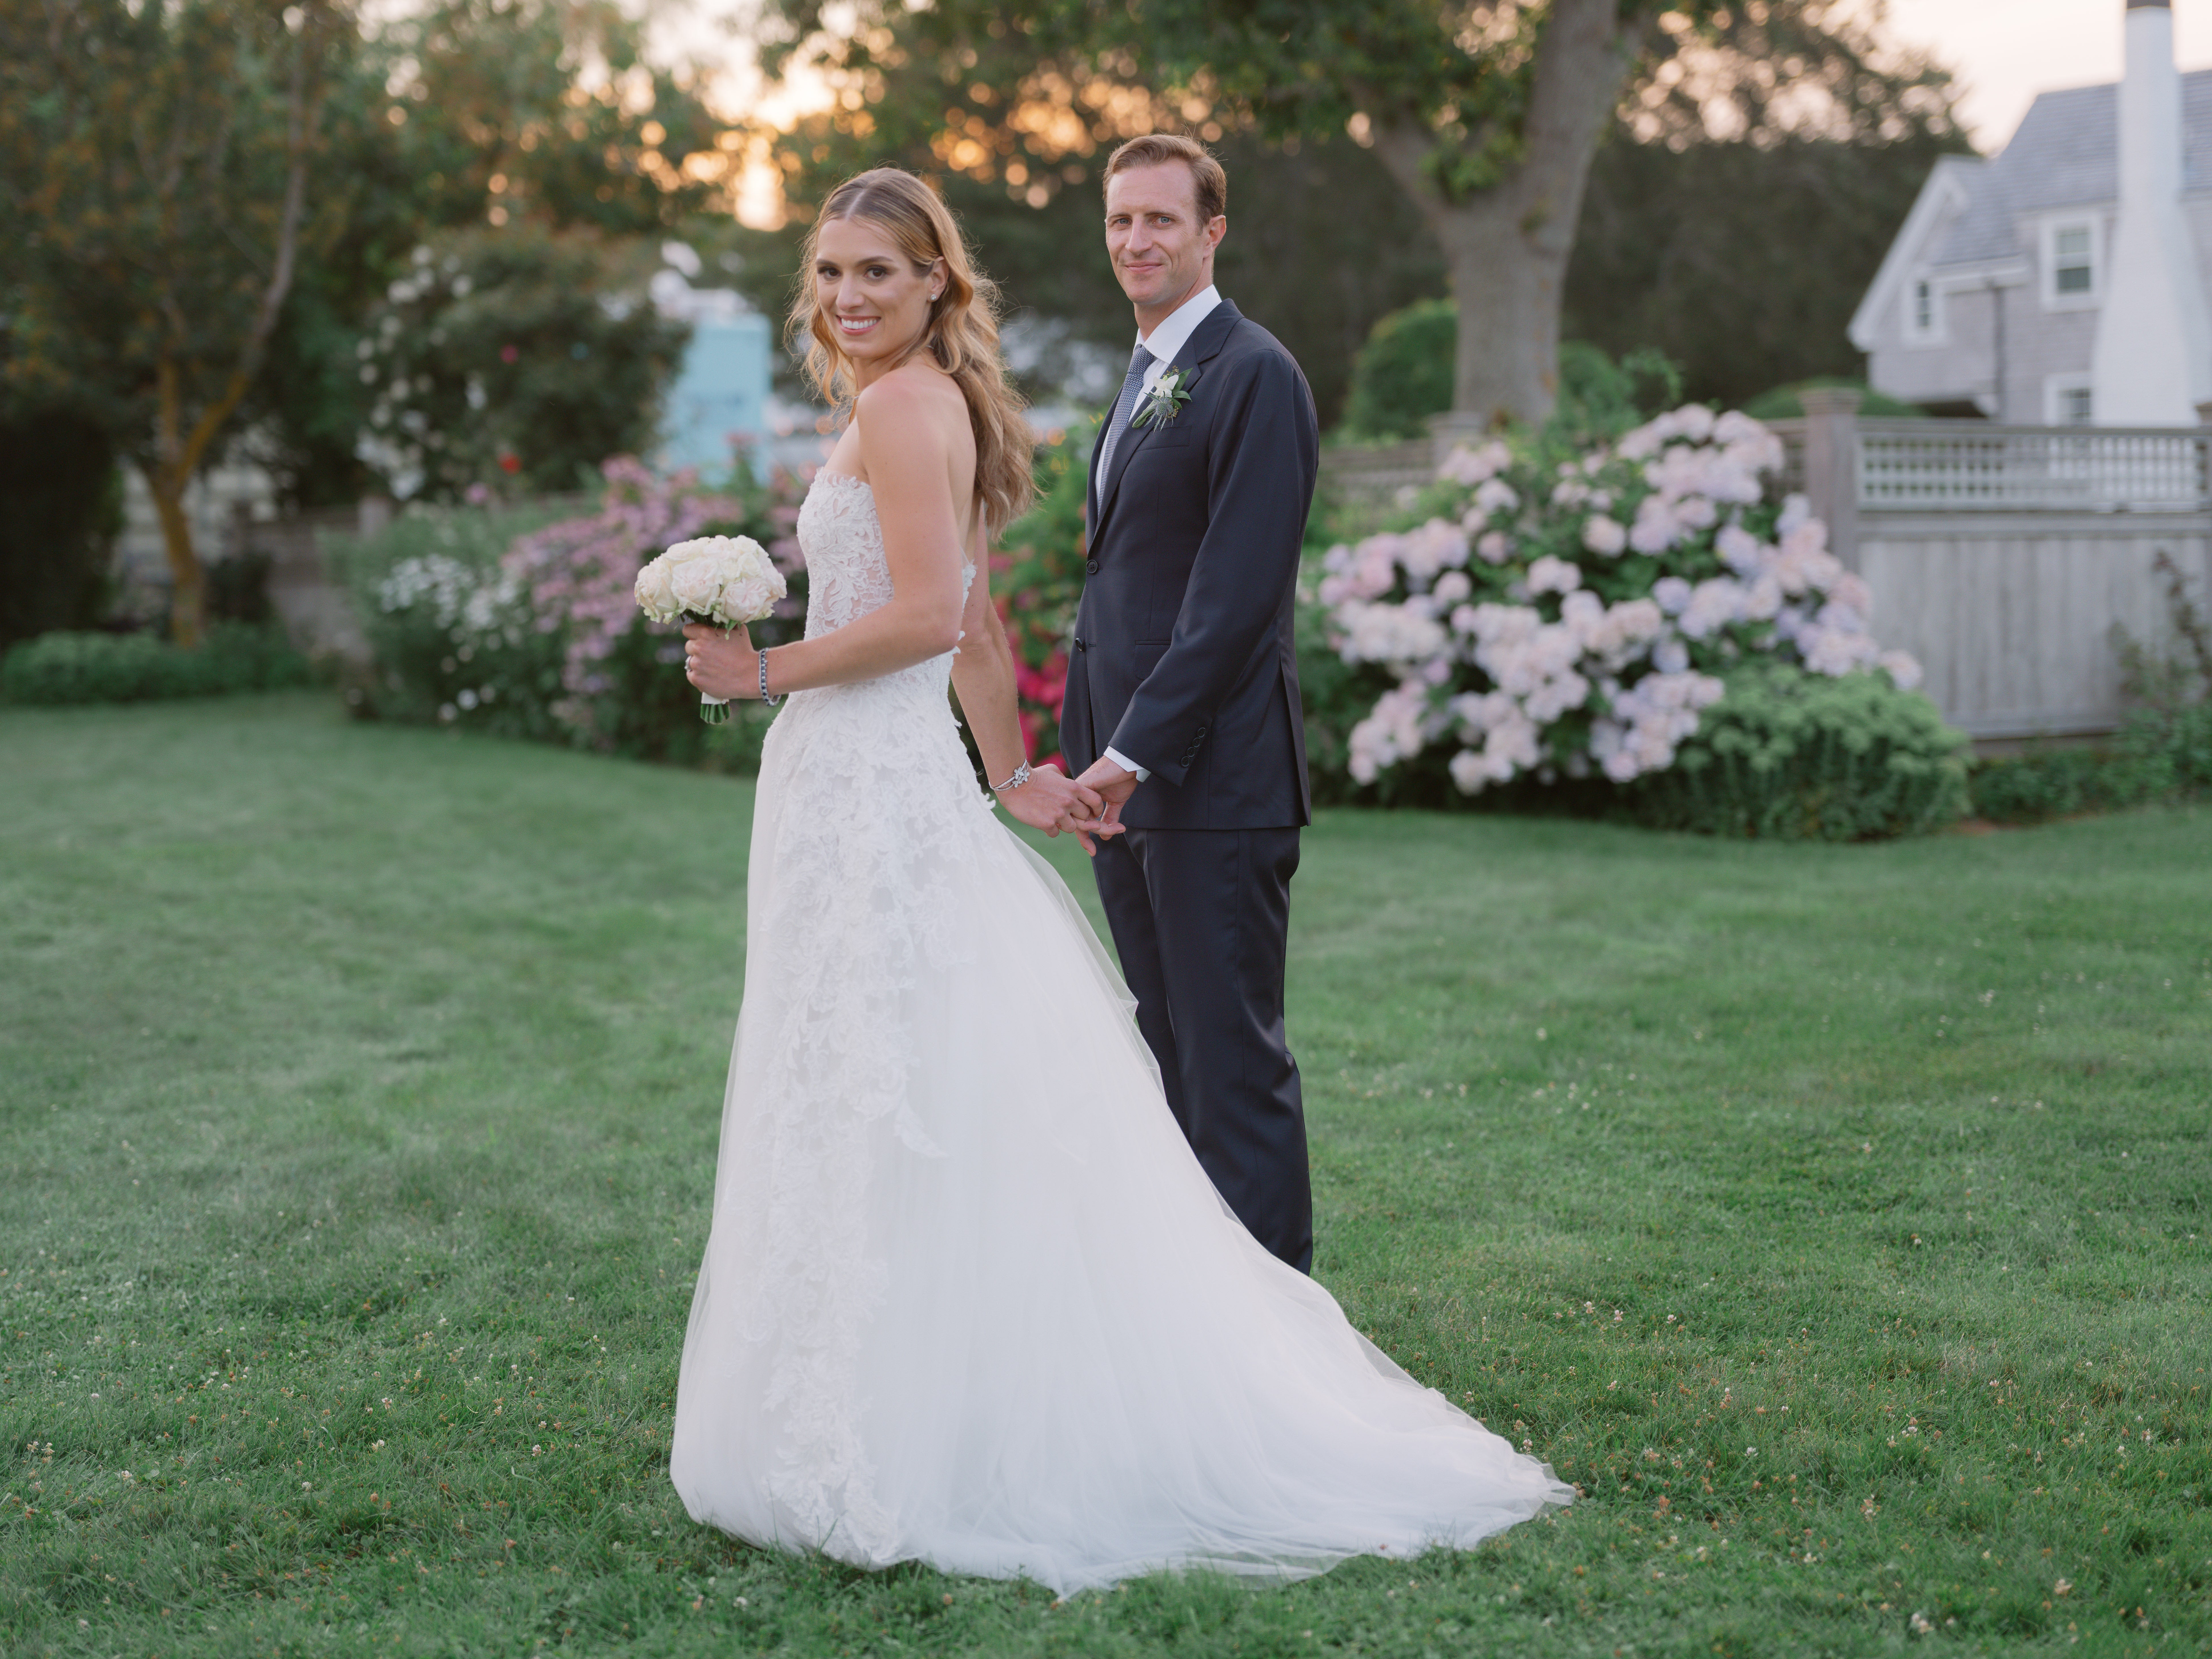 Mariah Kennedy Cuomo Wore Vera Wang to Marry Tellef Lundevall at Golden Hour in Hyannis Port